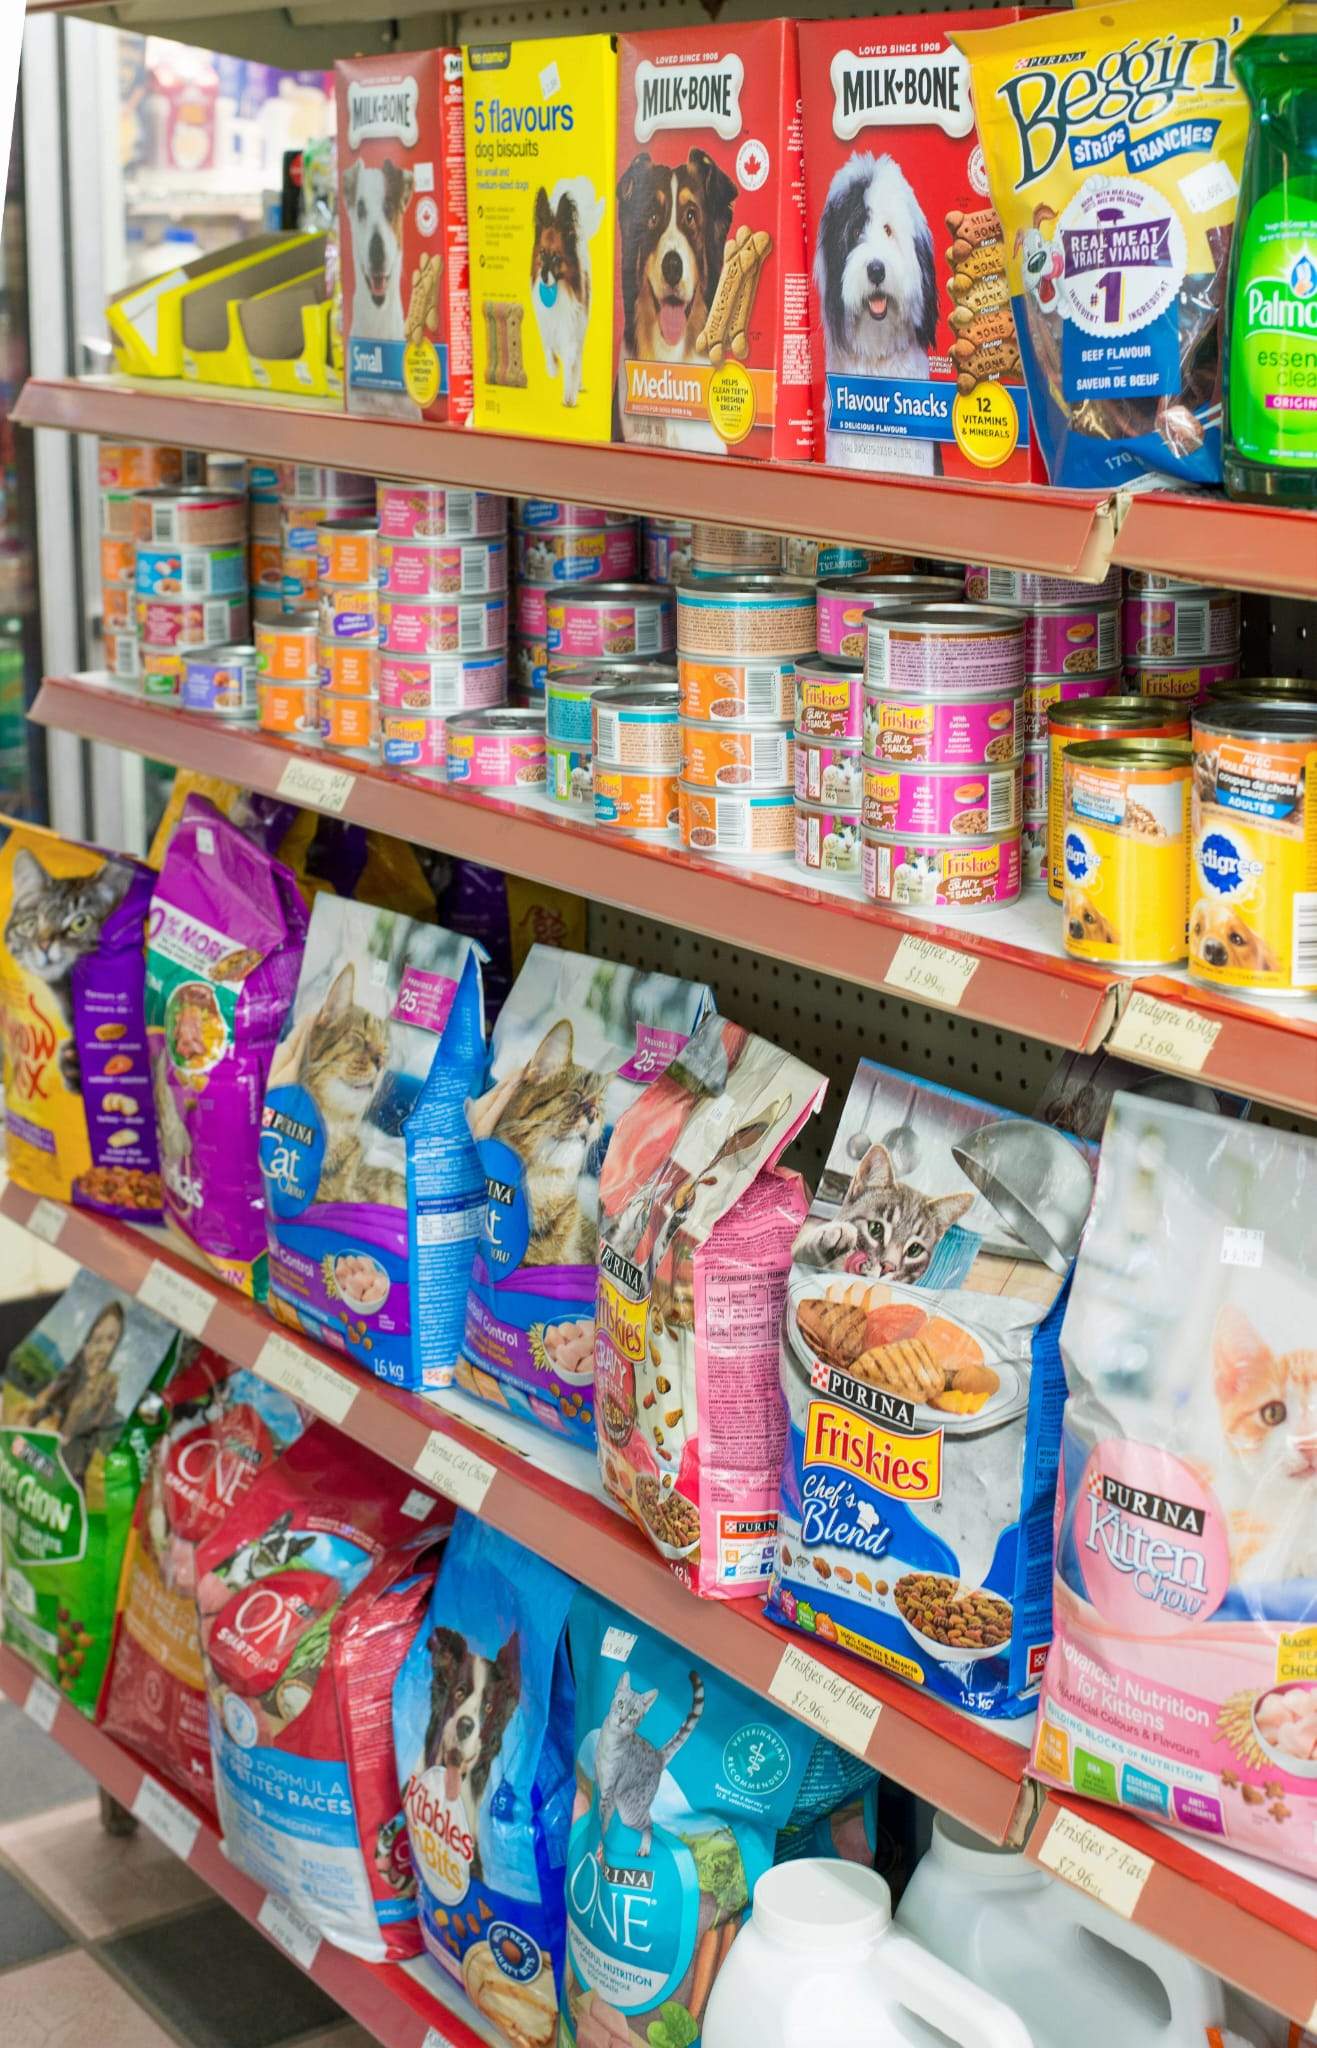 Carefully selected pet food that you would need for your beloved pets